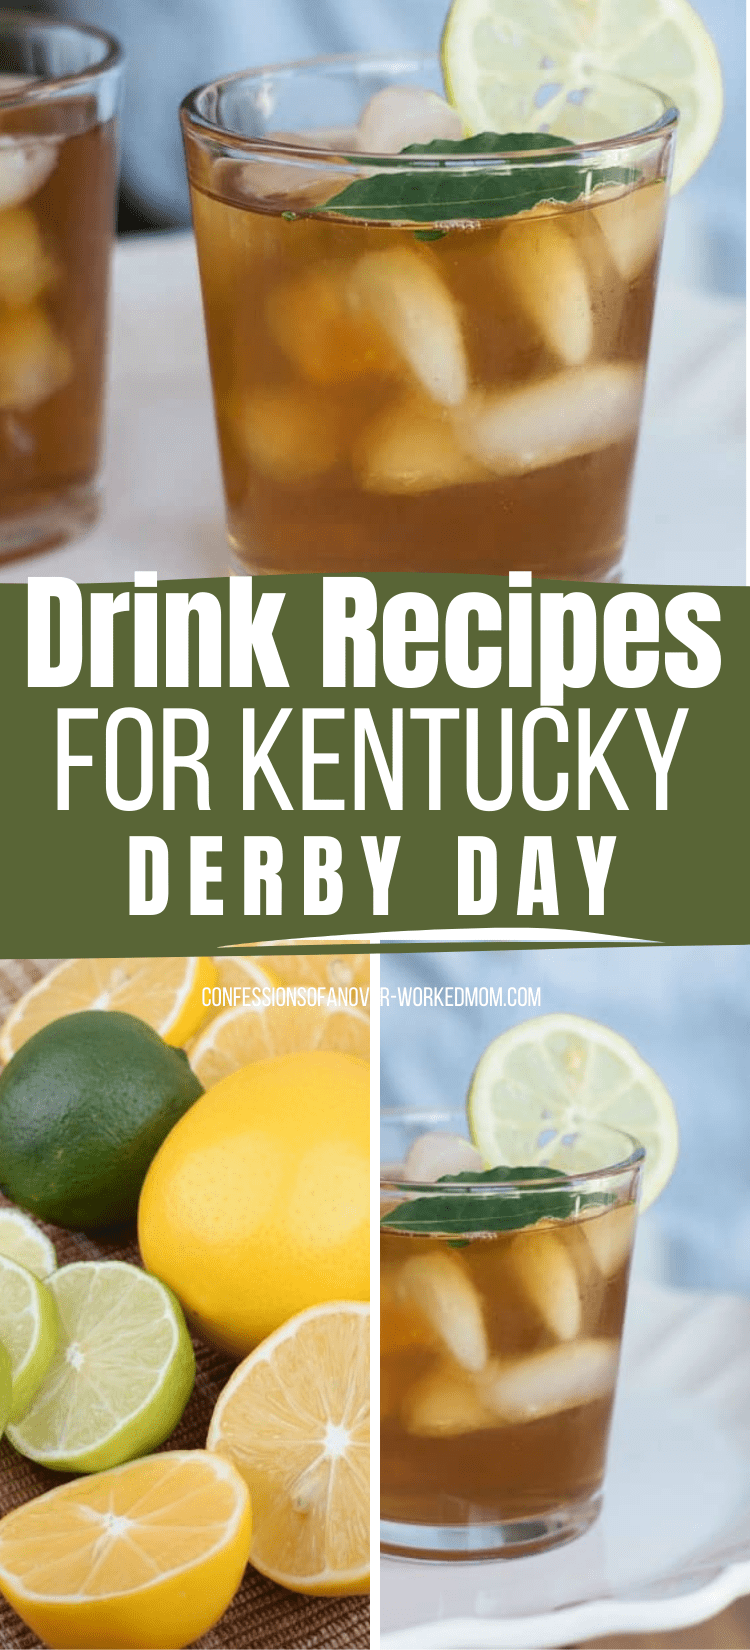 You will love these drink recipes for Kentucky Derby Day! Try a few of these mocktails for Kentucky Derby Day this year.